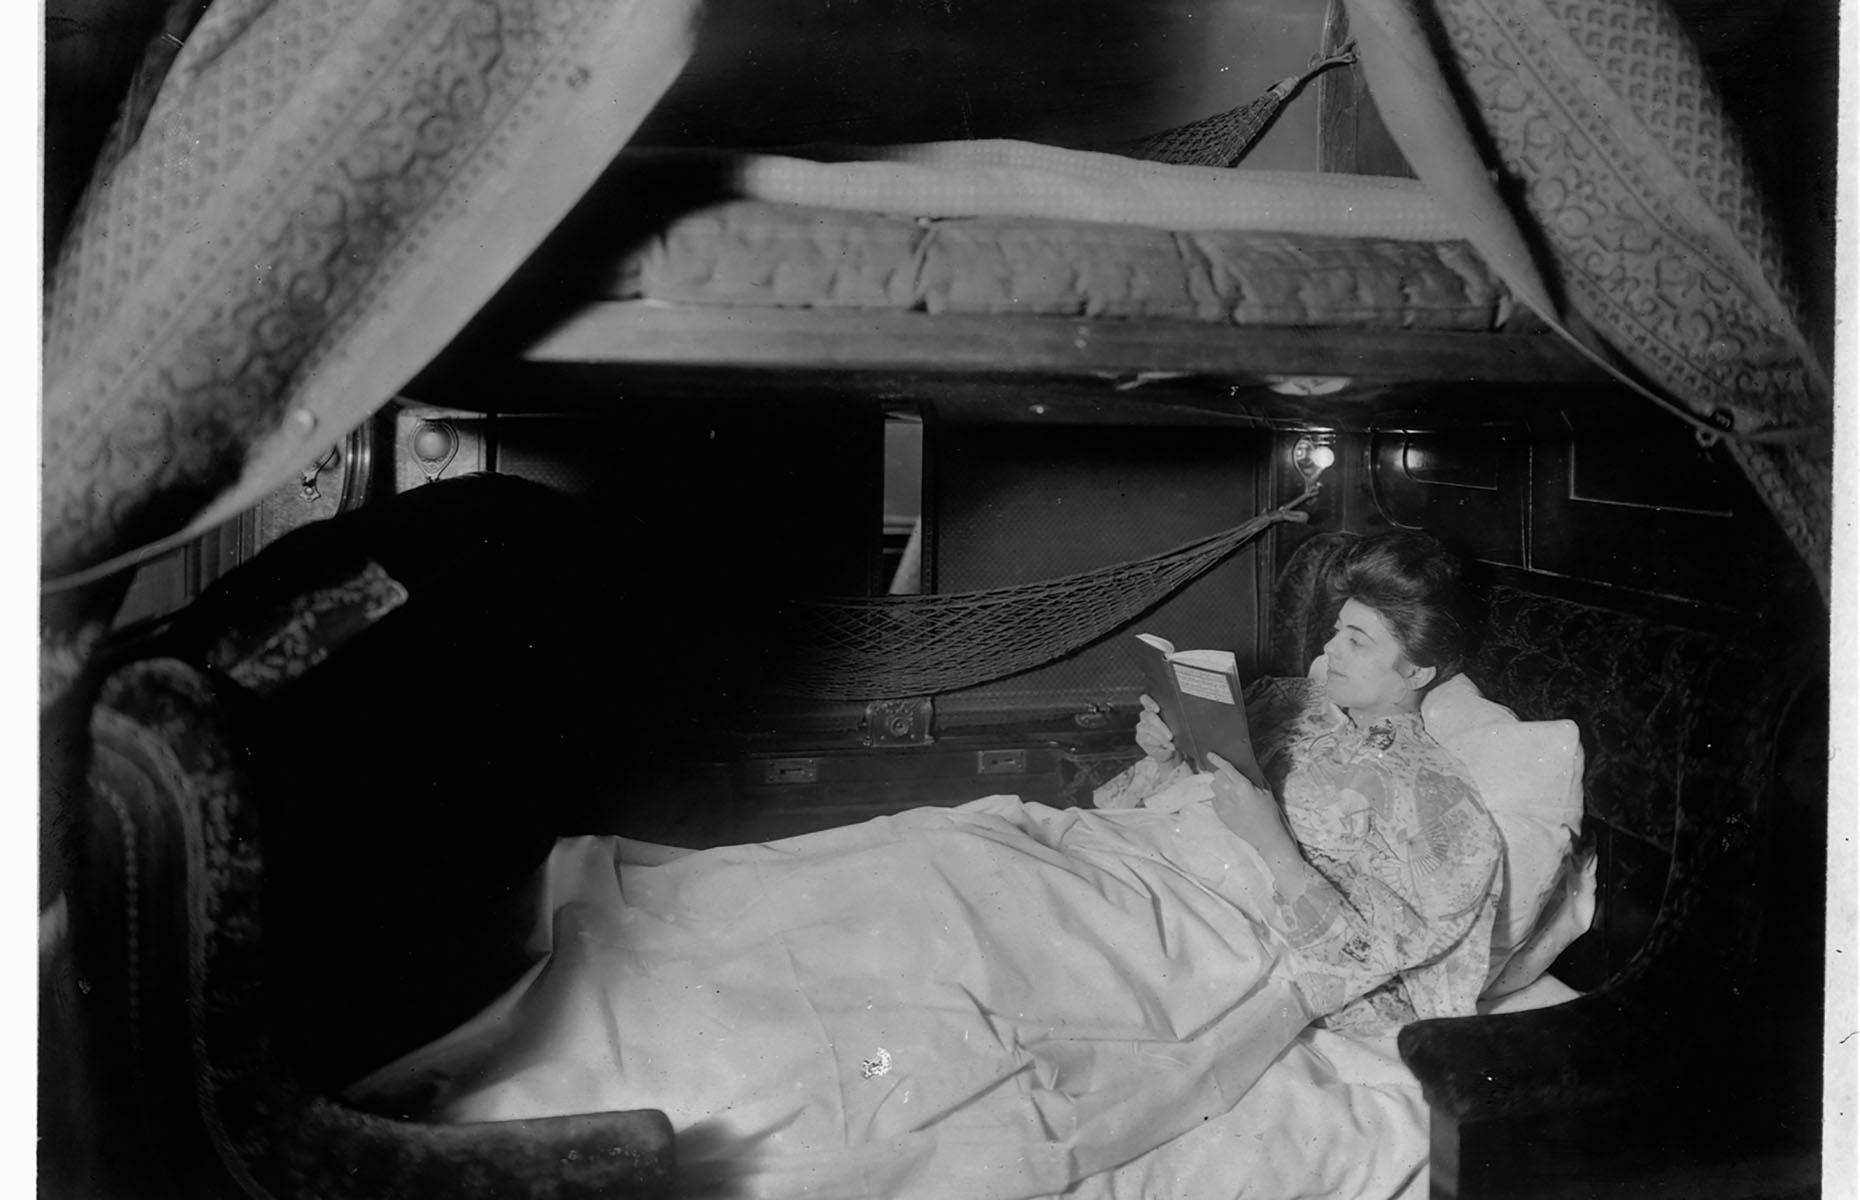 While train travel was still considered a luxury, especially for the wealthier passengers, rather than just a mode of transport, comfort was a priority. Photographed in 1905, this woman is enjoying reading a book before bed in her spacious bunk on a sleeping car.